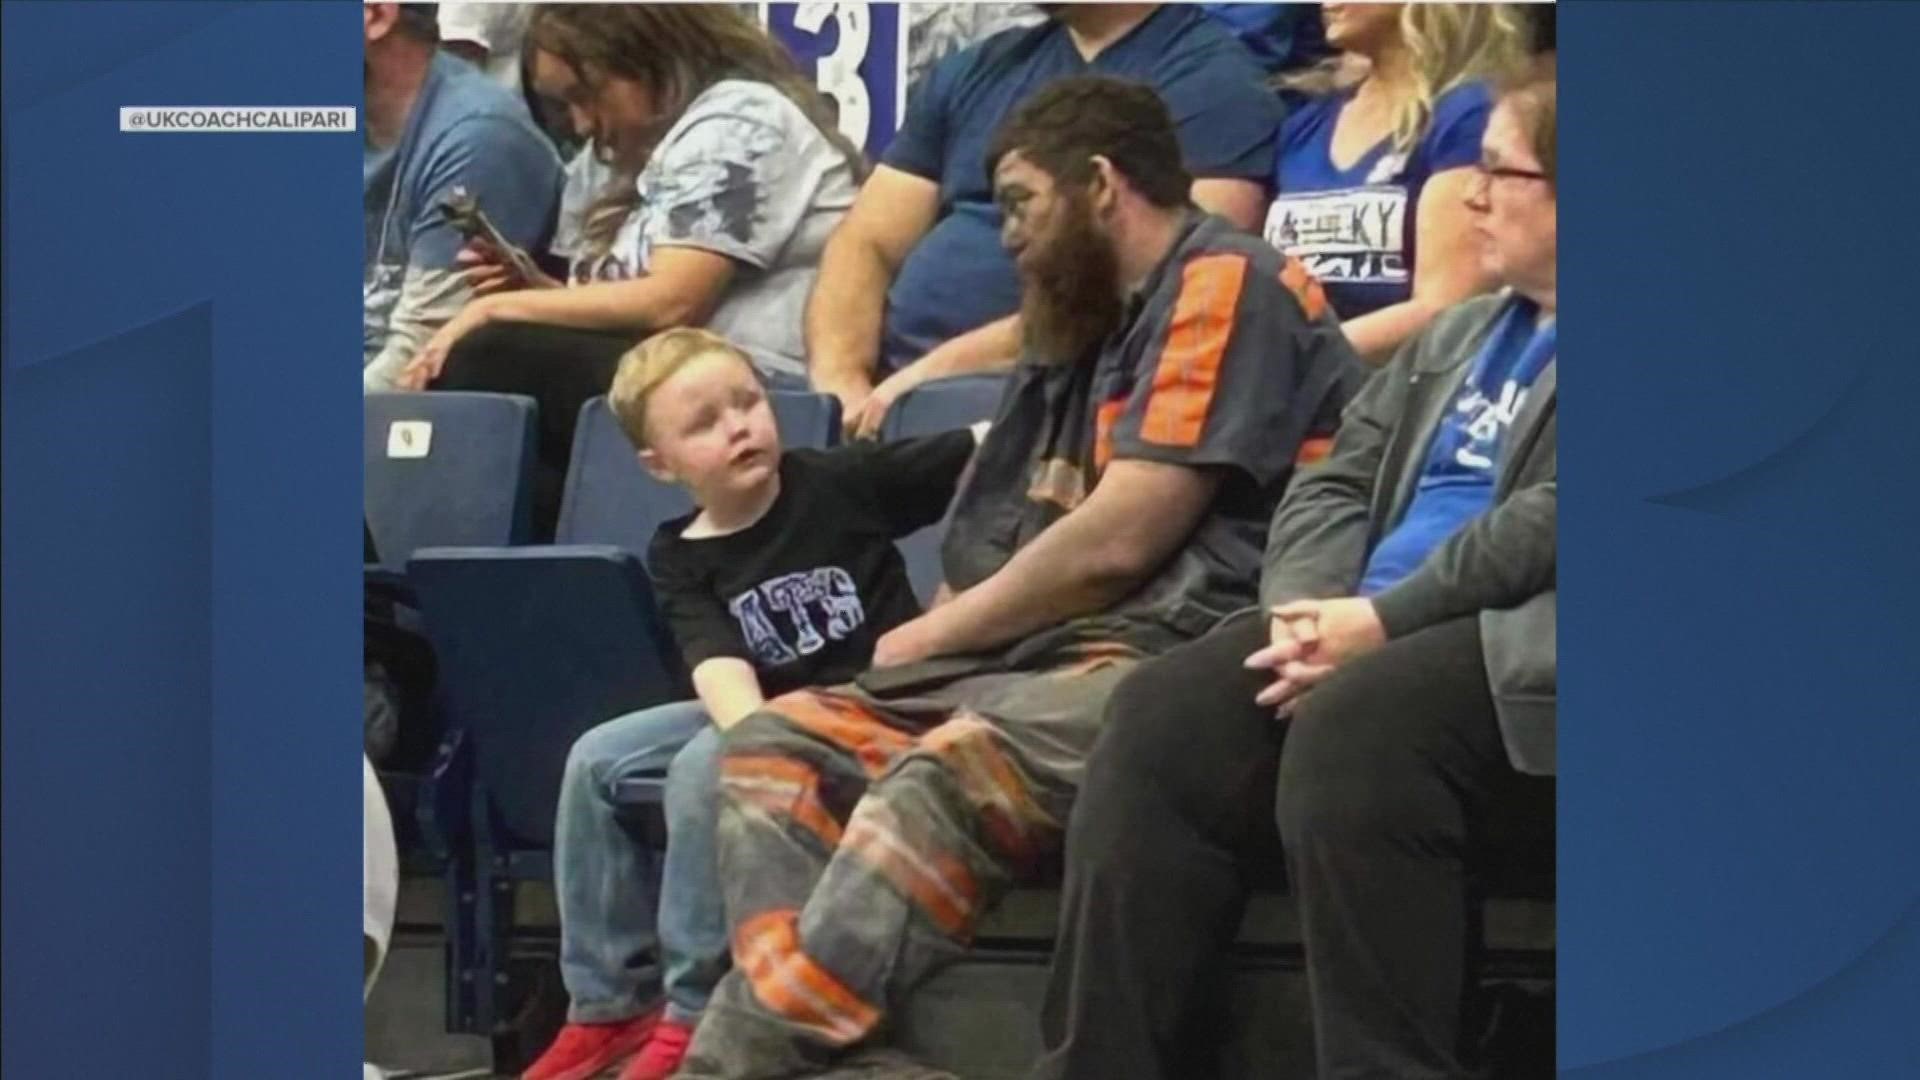 A family that attended the University of Kentucky's annual Blue-White game on Saturday got a lot of attention for their dedication to making a family memory.